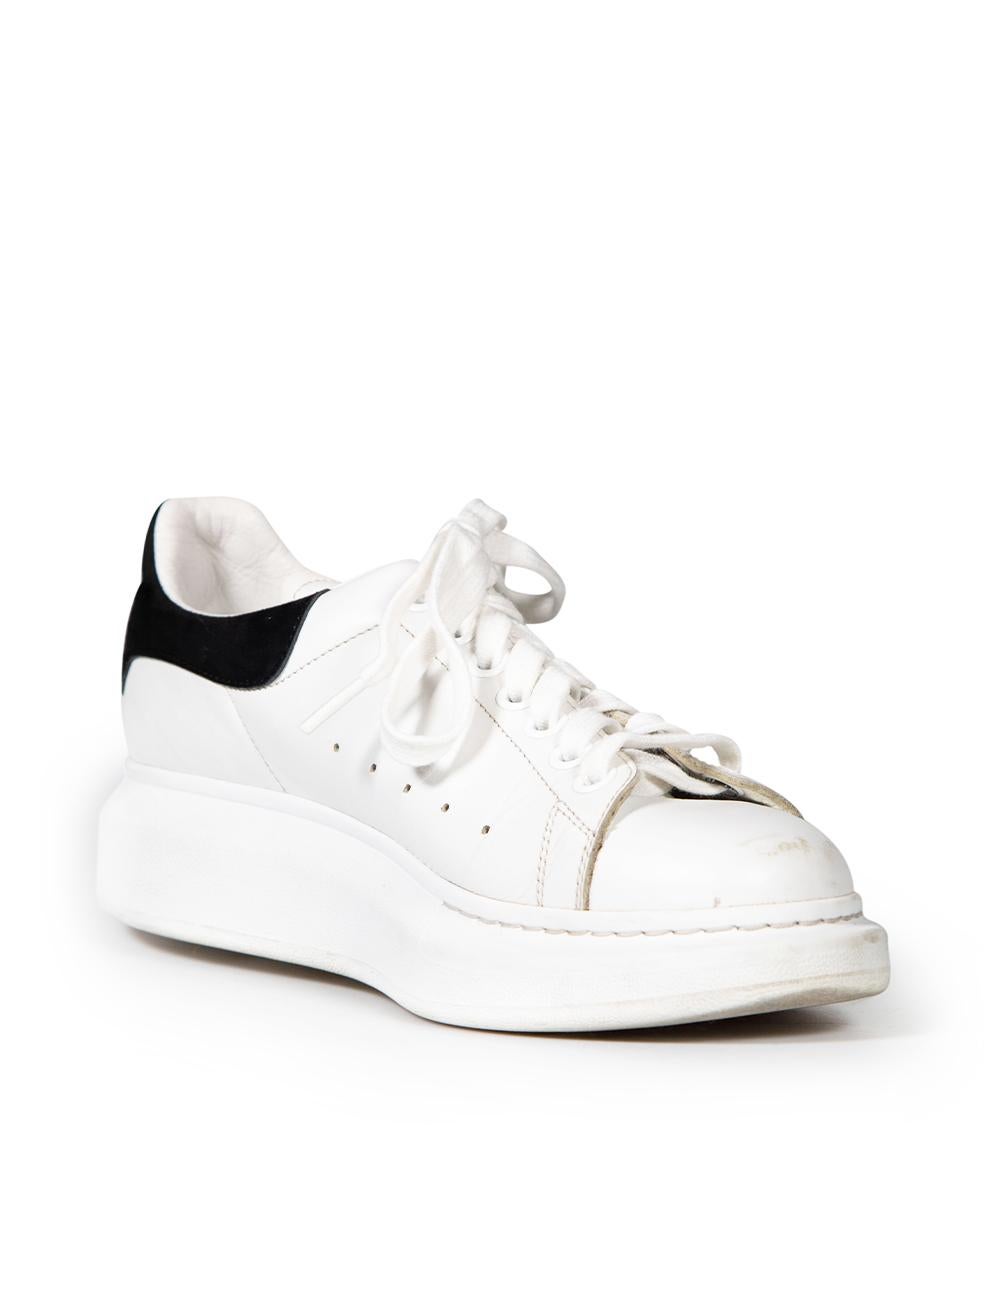 CONDITION is Good. Minor wear to trainers is evident. Light creasing to leather on toe creases and minor scuff marks to front of both toes on this used Alexander McQueen designer resale item. These shoes come with original dust bag.
 
 
 
 Details
